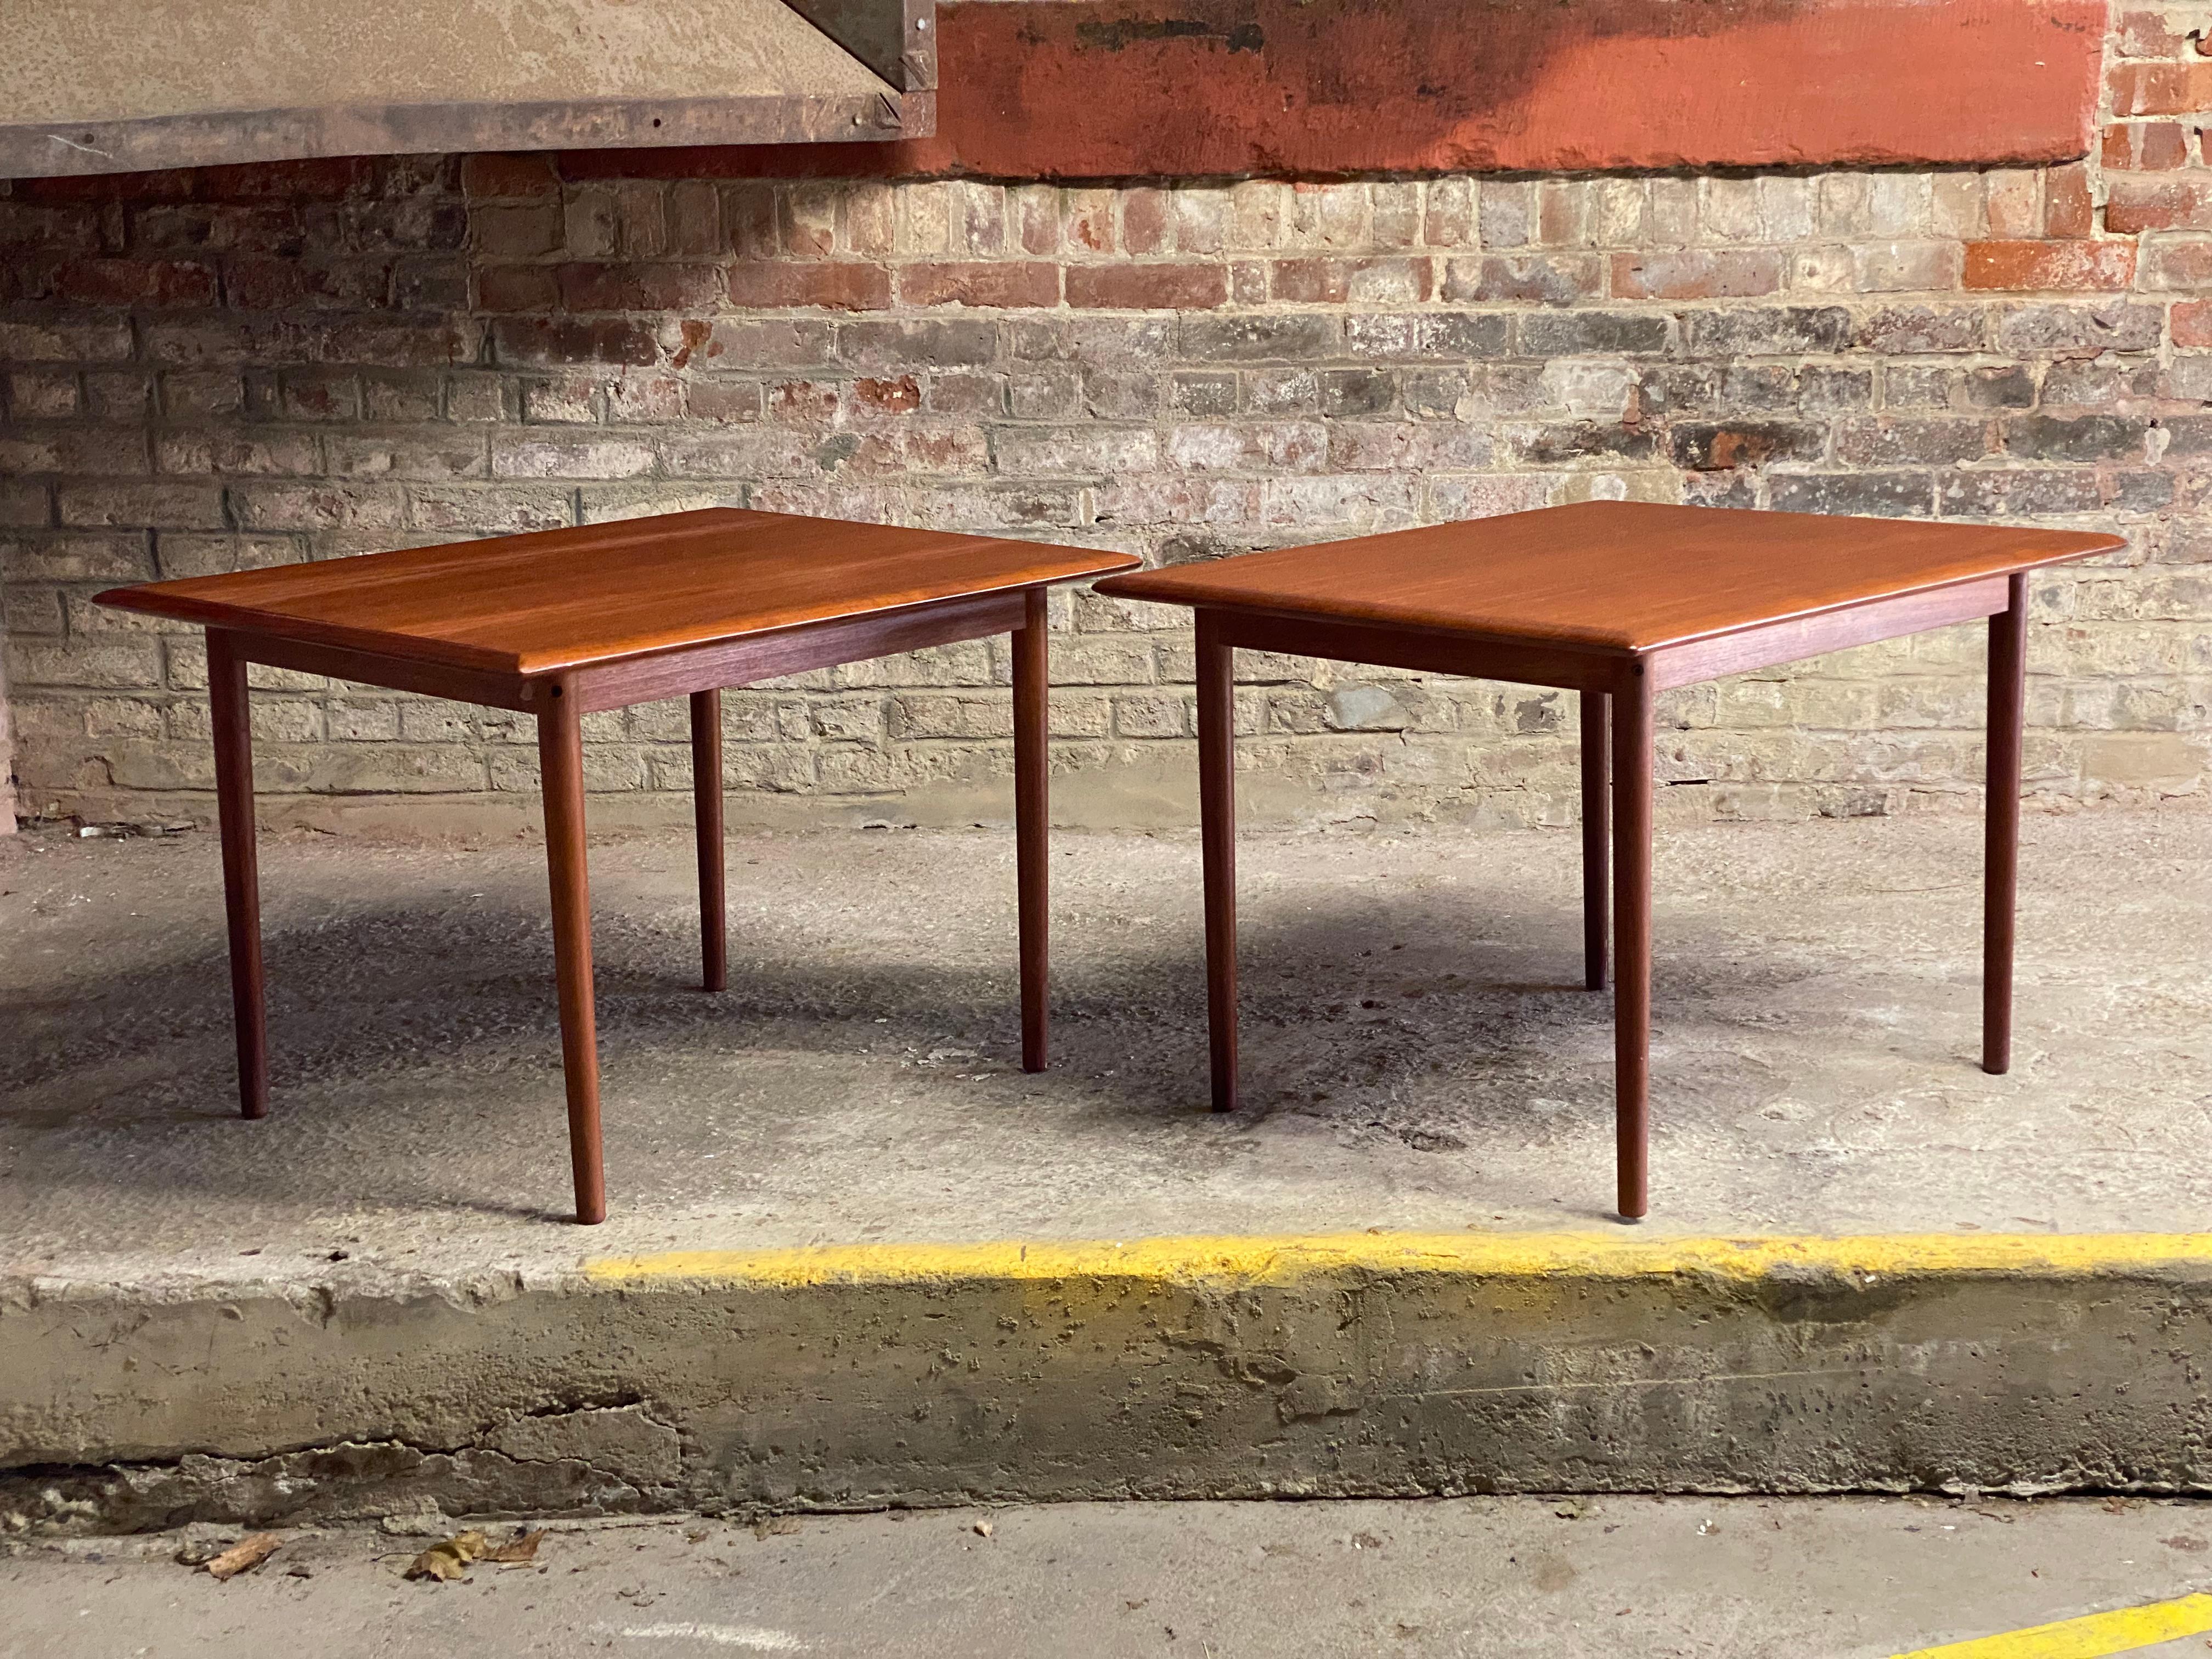 A fine pair of teak side tables by Haug Snekkeri, A/S, Norway. Both examples are signed on the underside. Featuring removable tapered solid teak legs, mitered corner tops with beautifully figured teak veneers. Flat pack construction. Circa 1960.